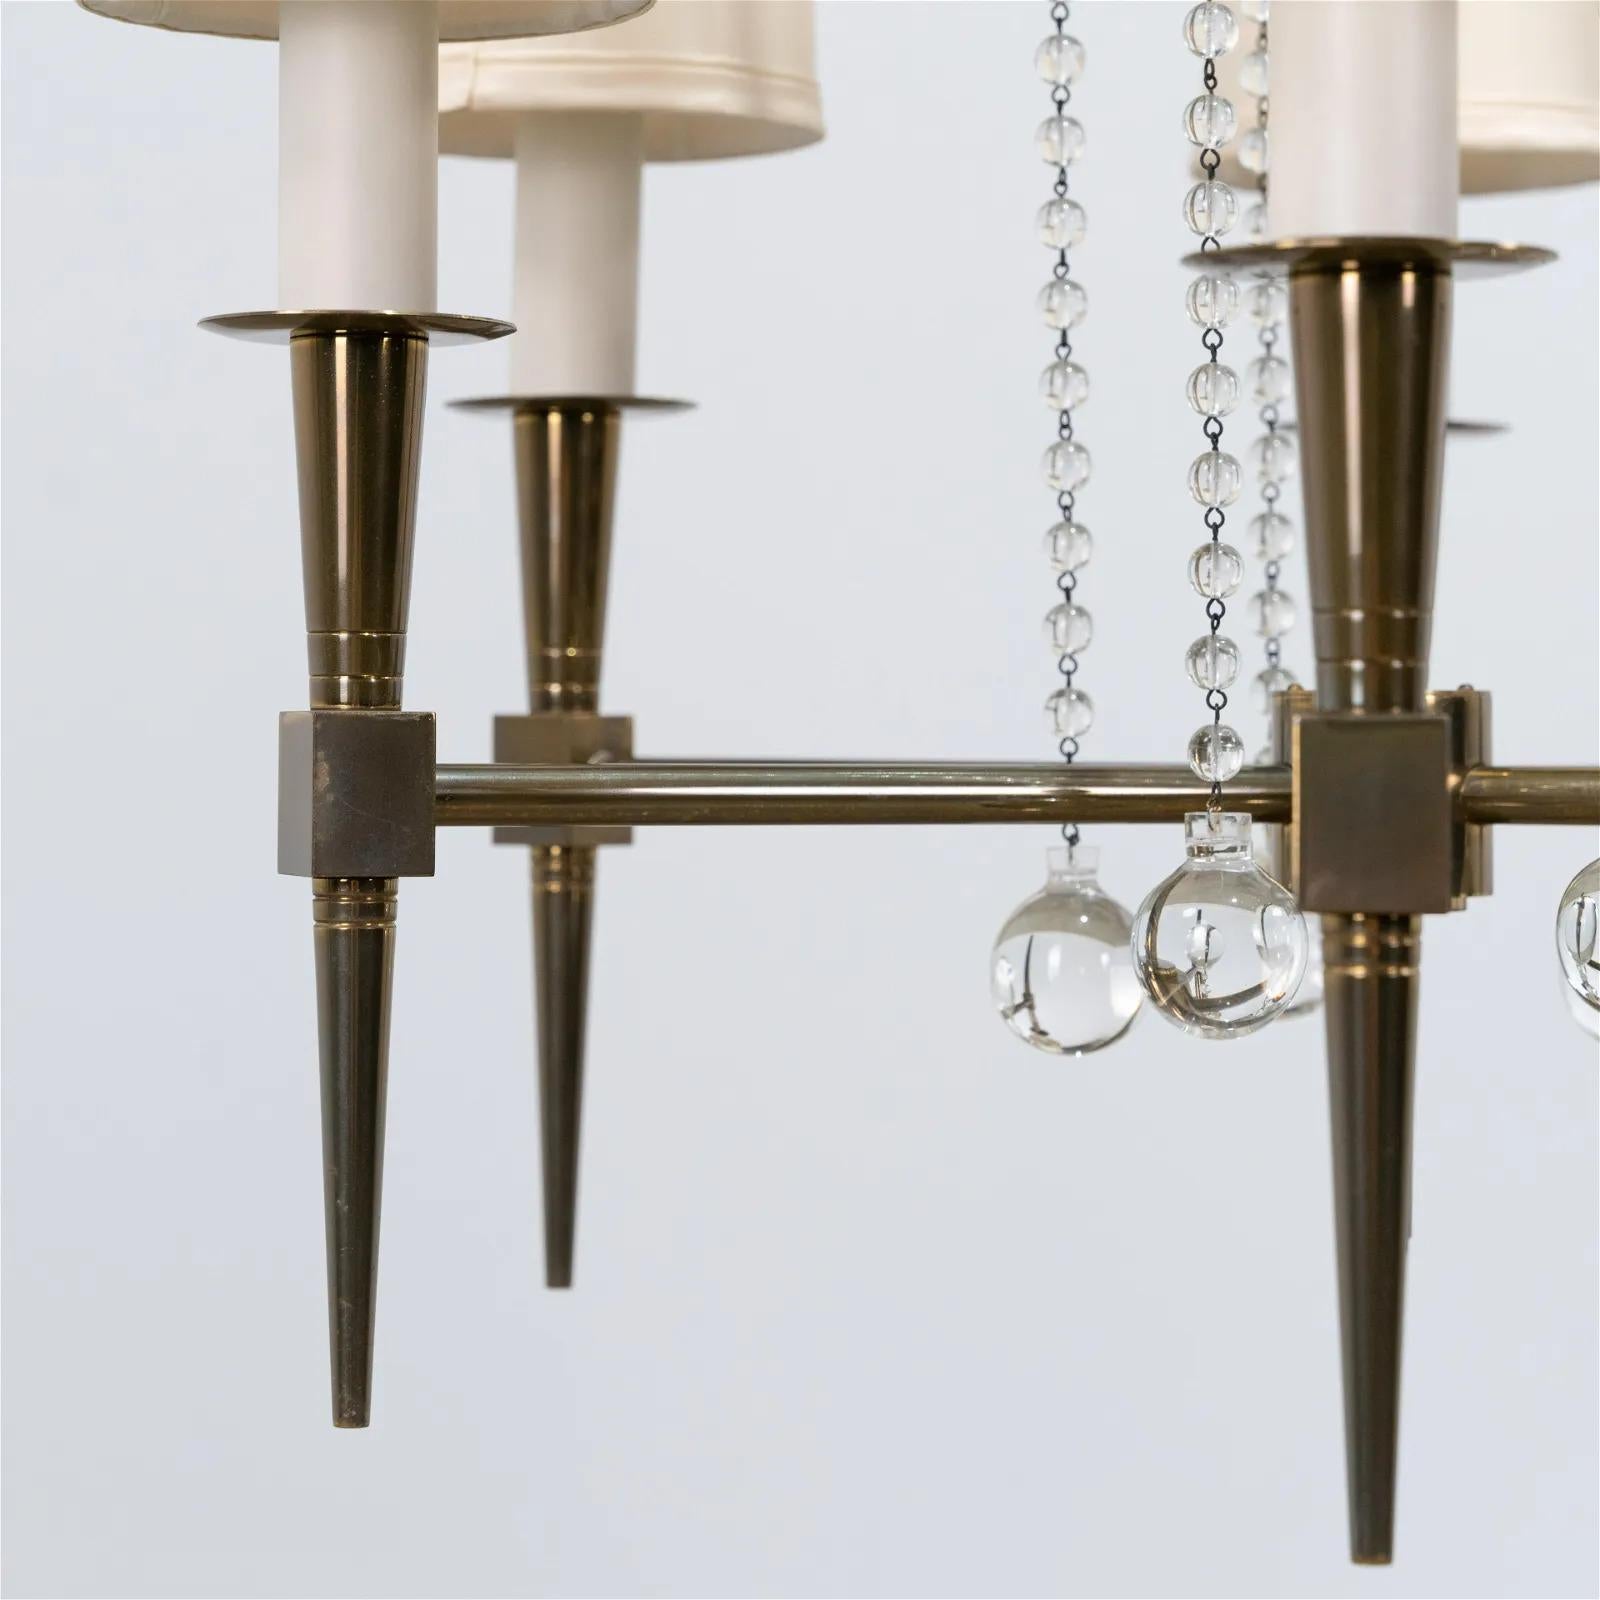 Elegant, 1950s Tommi Parzinger for Parzinger Originals, 6 arm brass and crystal chandelier. This chandelier has silk shades. Model No. 1 in brass with suspended crystal beads.